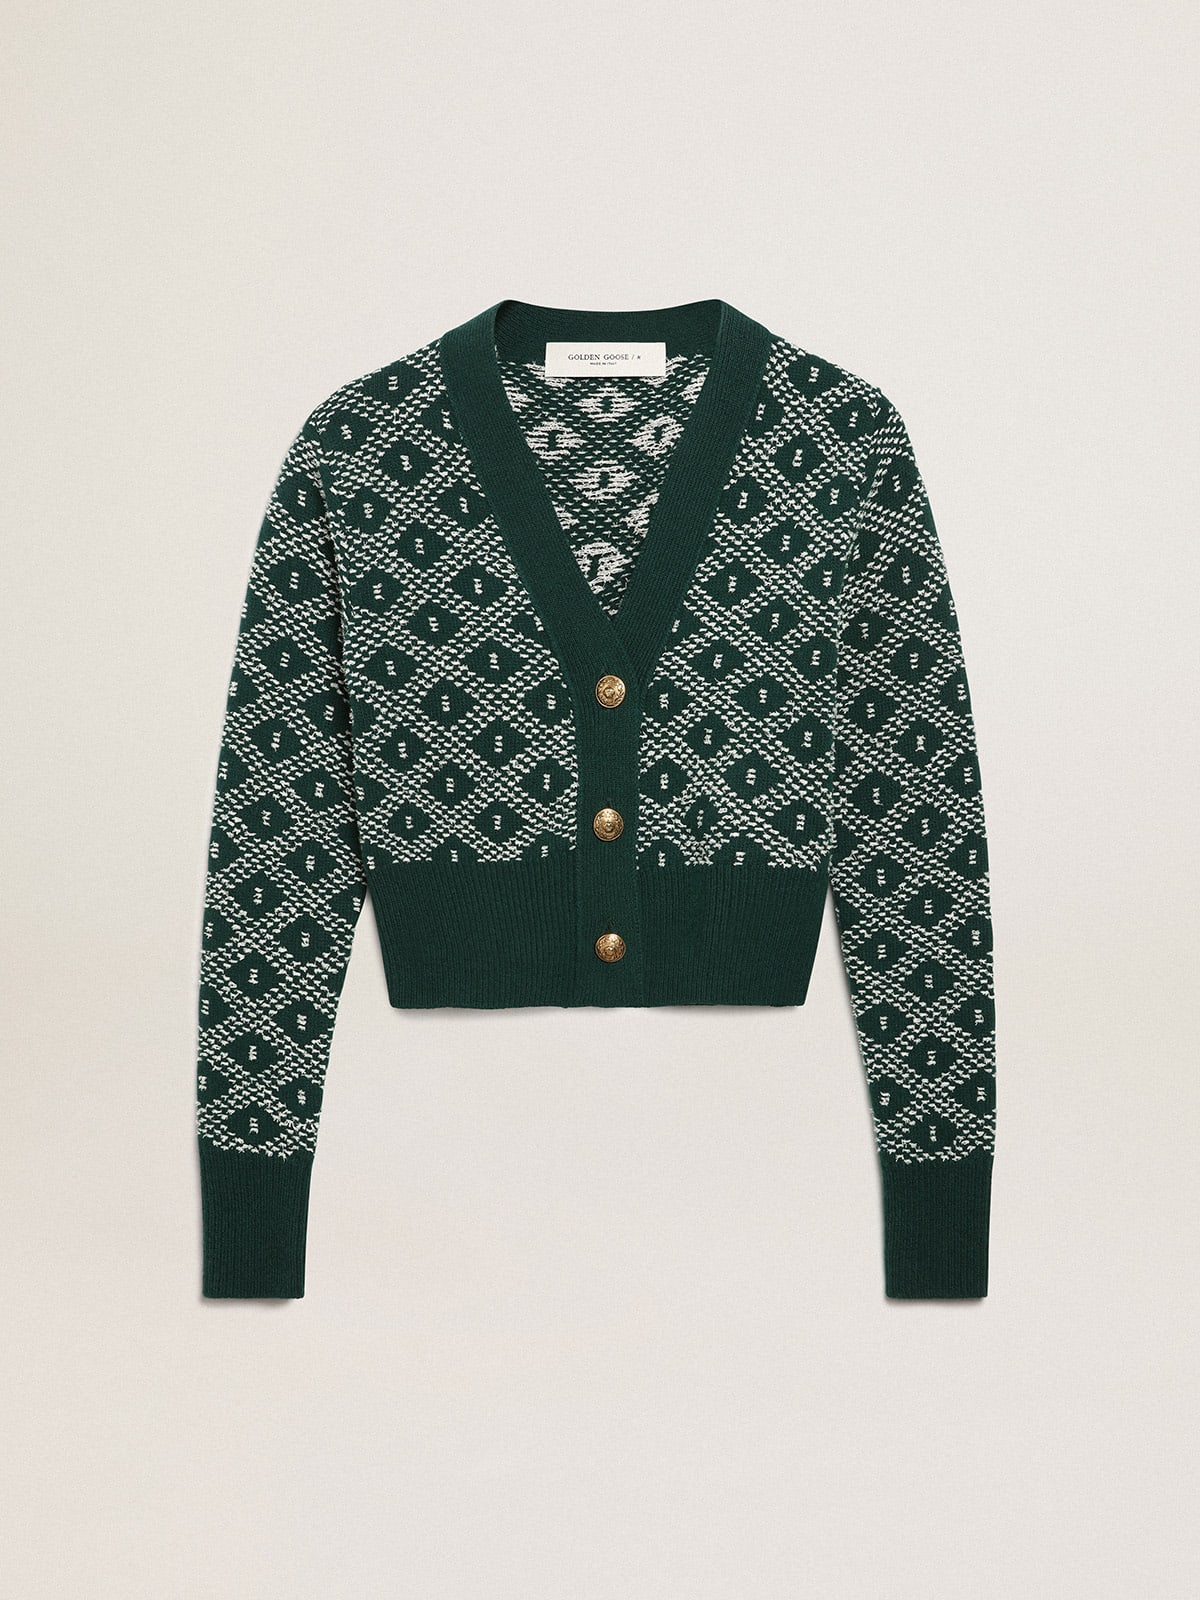 Journey Collection cropped cardigan with green and white jacquard diamond pattern